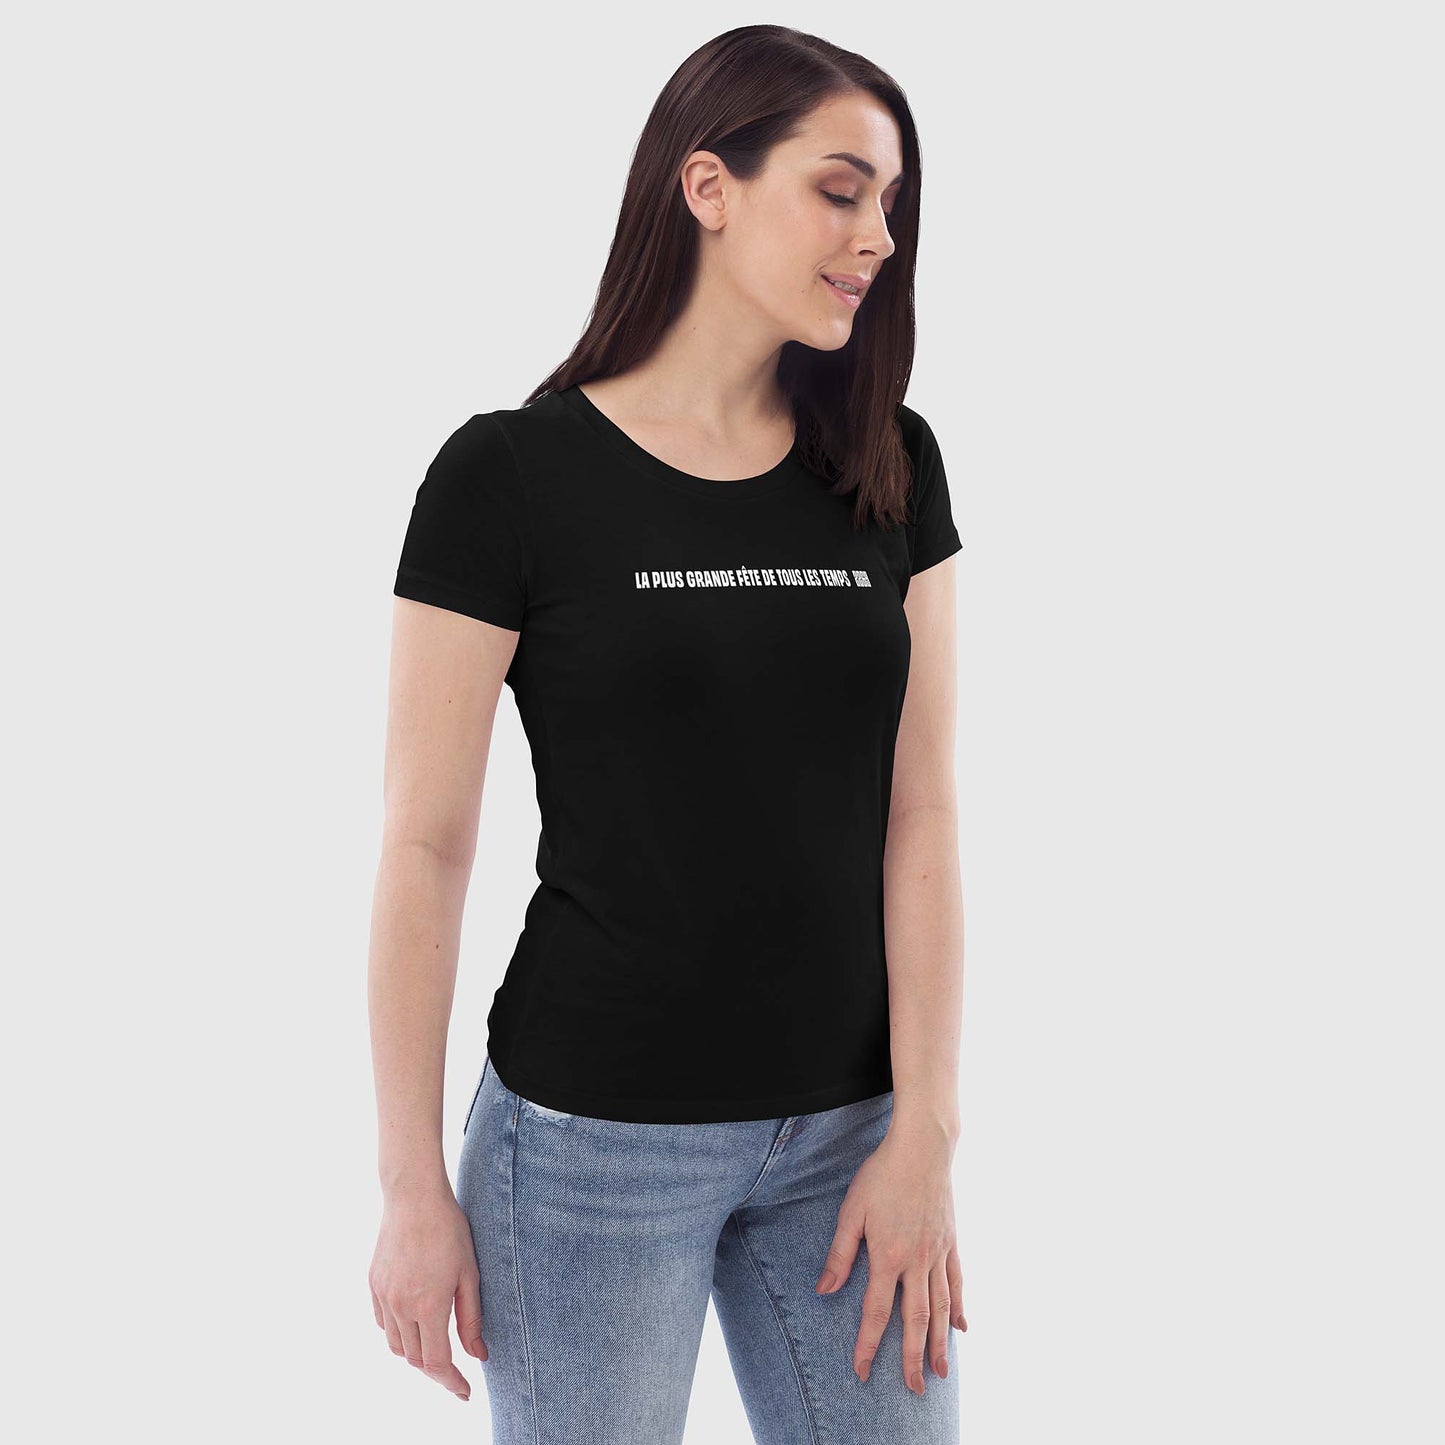 Women's black fitted organic cotton t-shirt with French 2269 party message